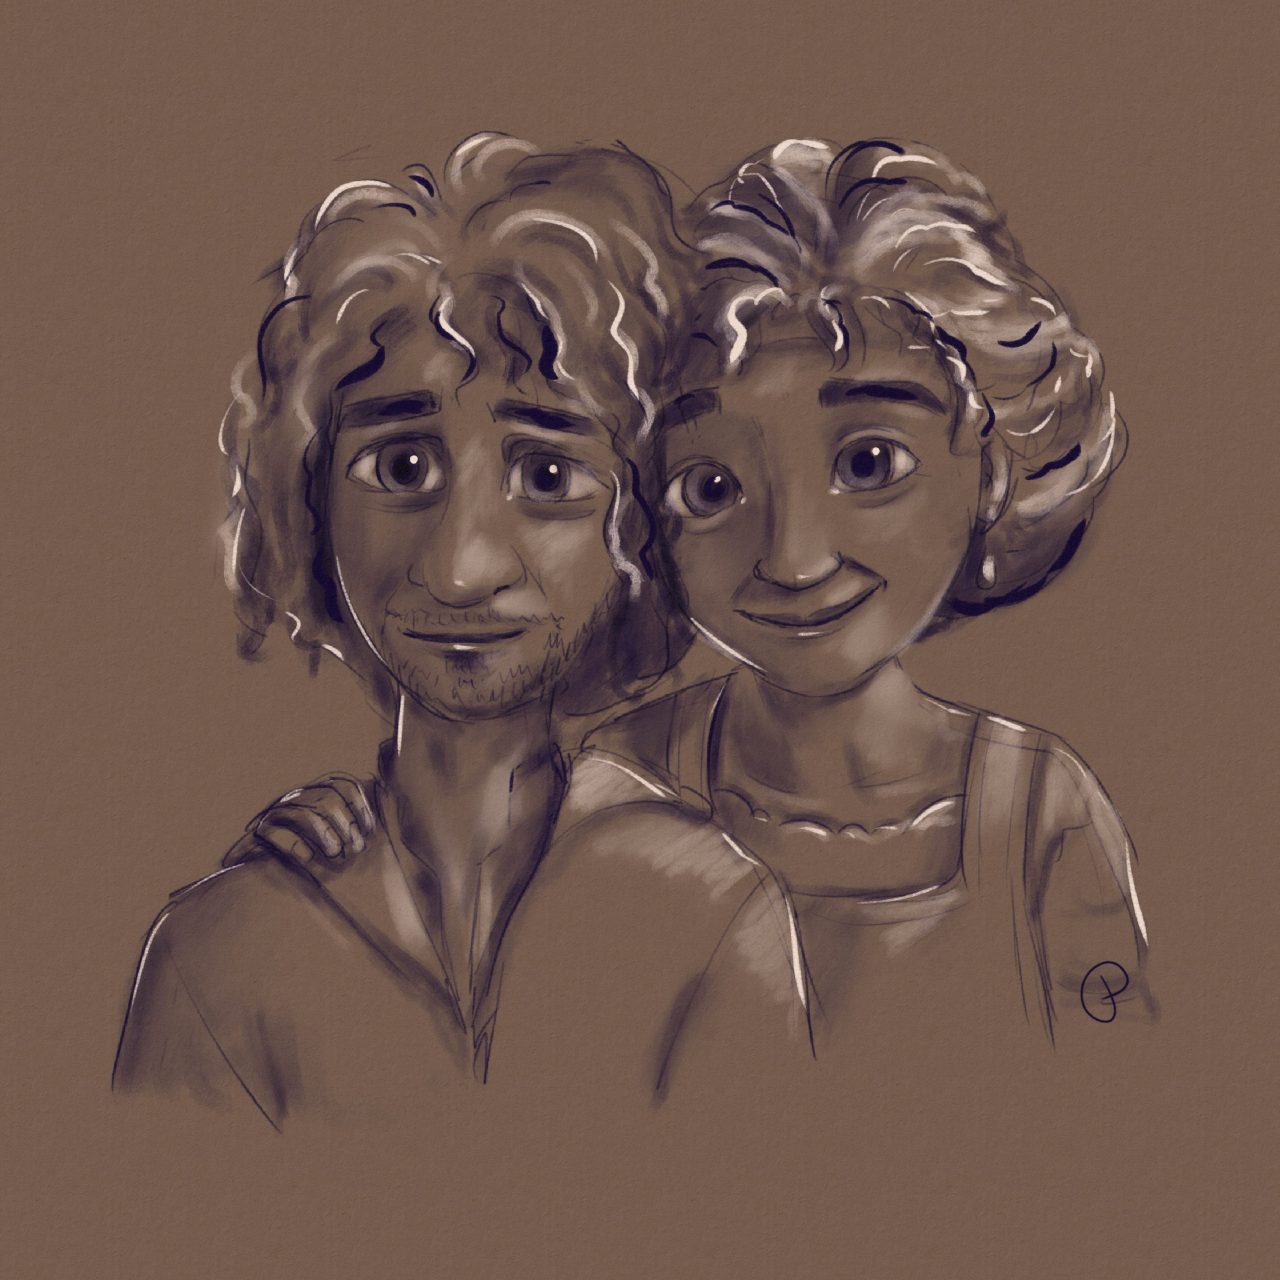 Quick Bruno and Julieta study (30 min).[ID: Digital sketch of Bruno and Julieta from Encanto. Julieta has her arm around Bruno’s shoulders and they’re both smiling. The first sketch is in dark purple and cream on a light brown background and the second is the same with added colors.] #encanto#encanto fanart#disney encanto#bruno madrigal#encanto bruno#julieta madrigal#encanto julieta#echos drawings#fanart#digital art